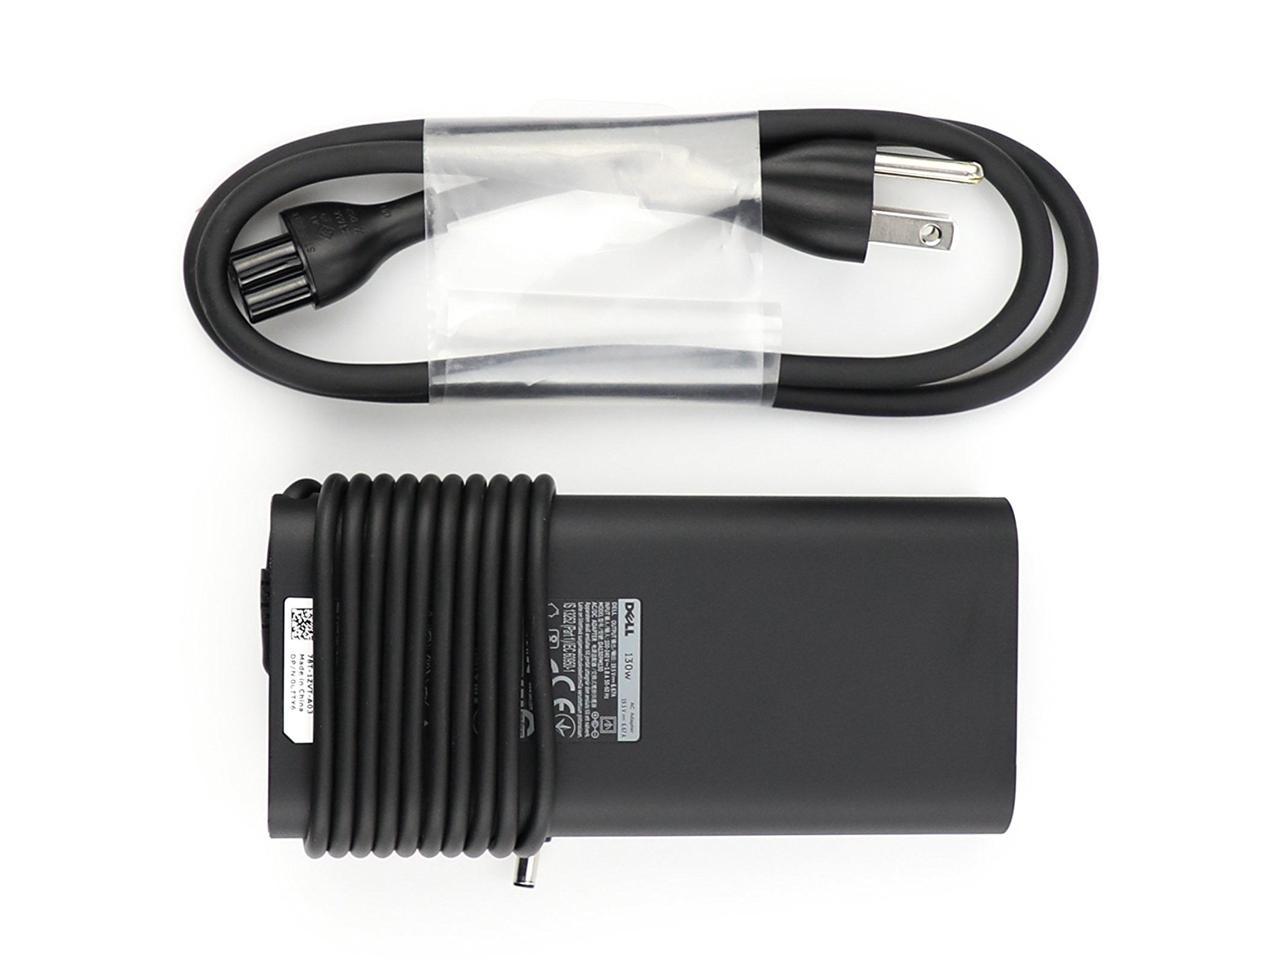 Original AC Adapter Charger for Dell Precision M3800 XPS 15 130w Ha130pm130 for sale online 